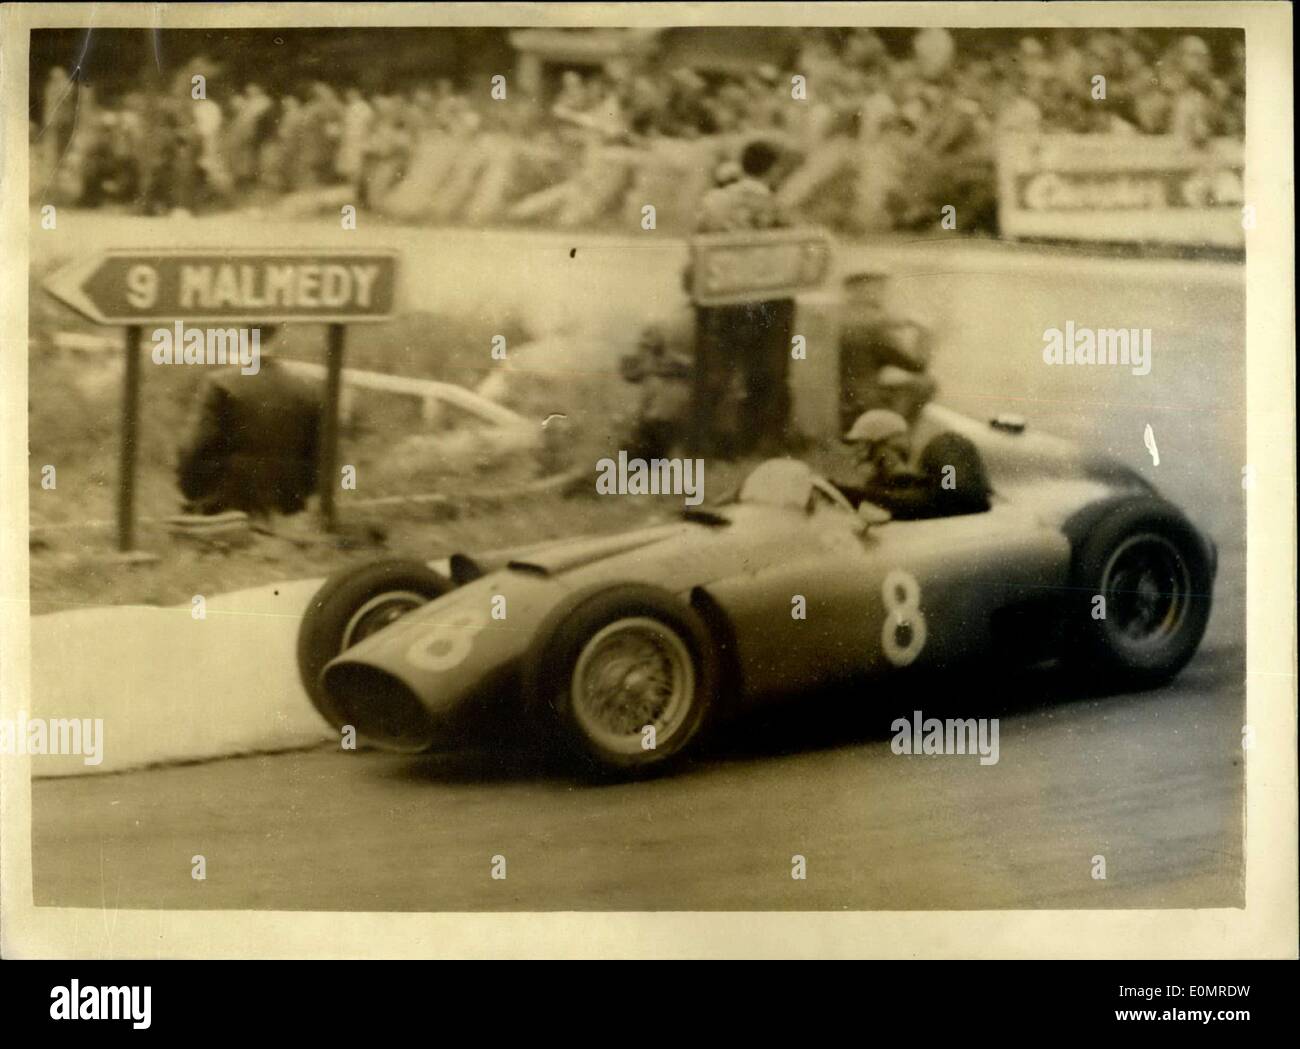 Jun. 04, 1956 - British Driver Wins Belgian Grand Prix.. Average Speed of 118.4 mph... Peter Collins, 24-year-old British driver - in his Ferrari - yesterday won the Belgian Grand Prix at the average speed of 118.4 mph.. Keystone Photo Shows:- Peter Collins at speed in his Ferrari - during the race at Spa, Belgium. Stock Photo